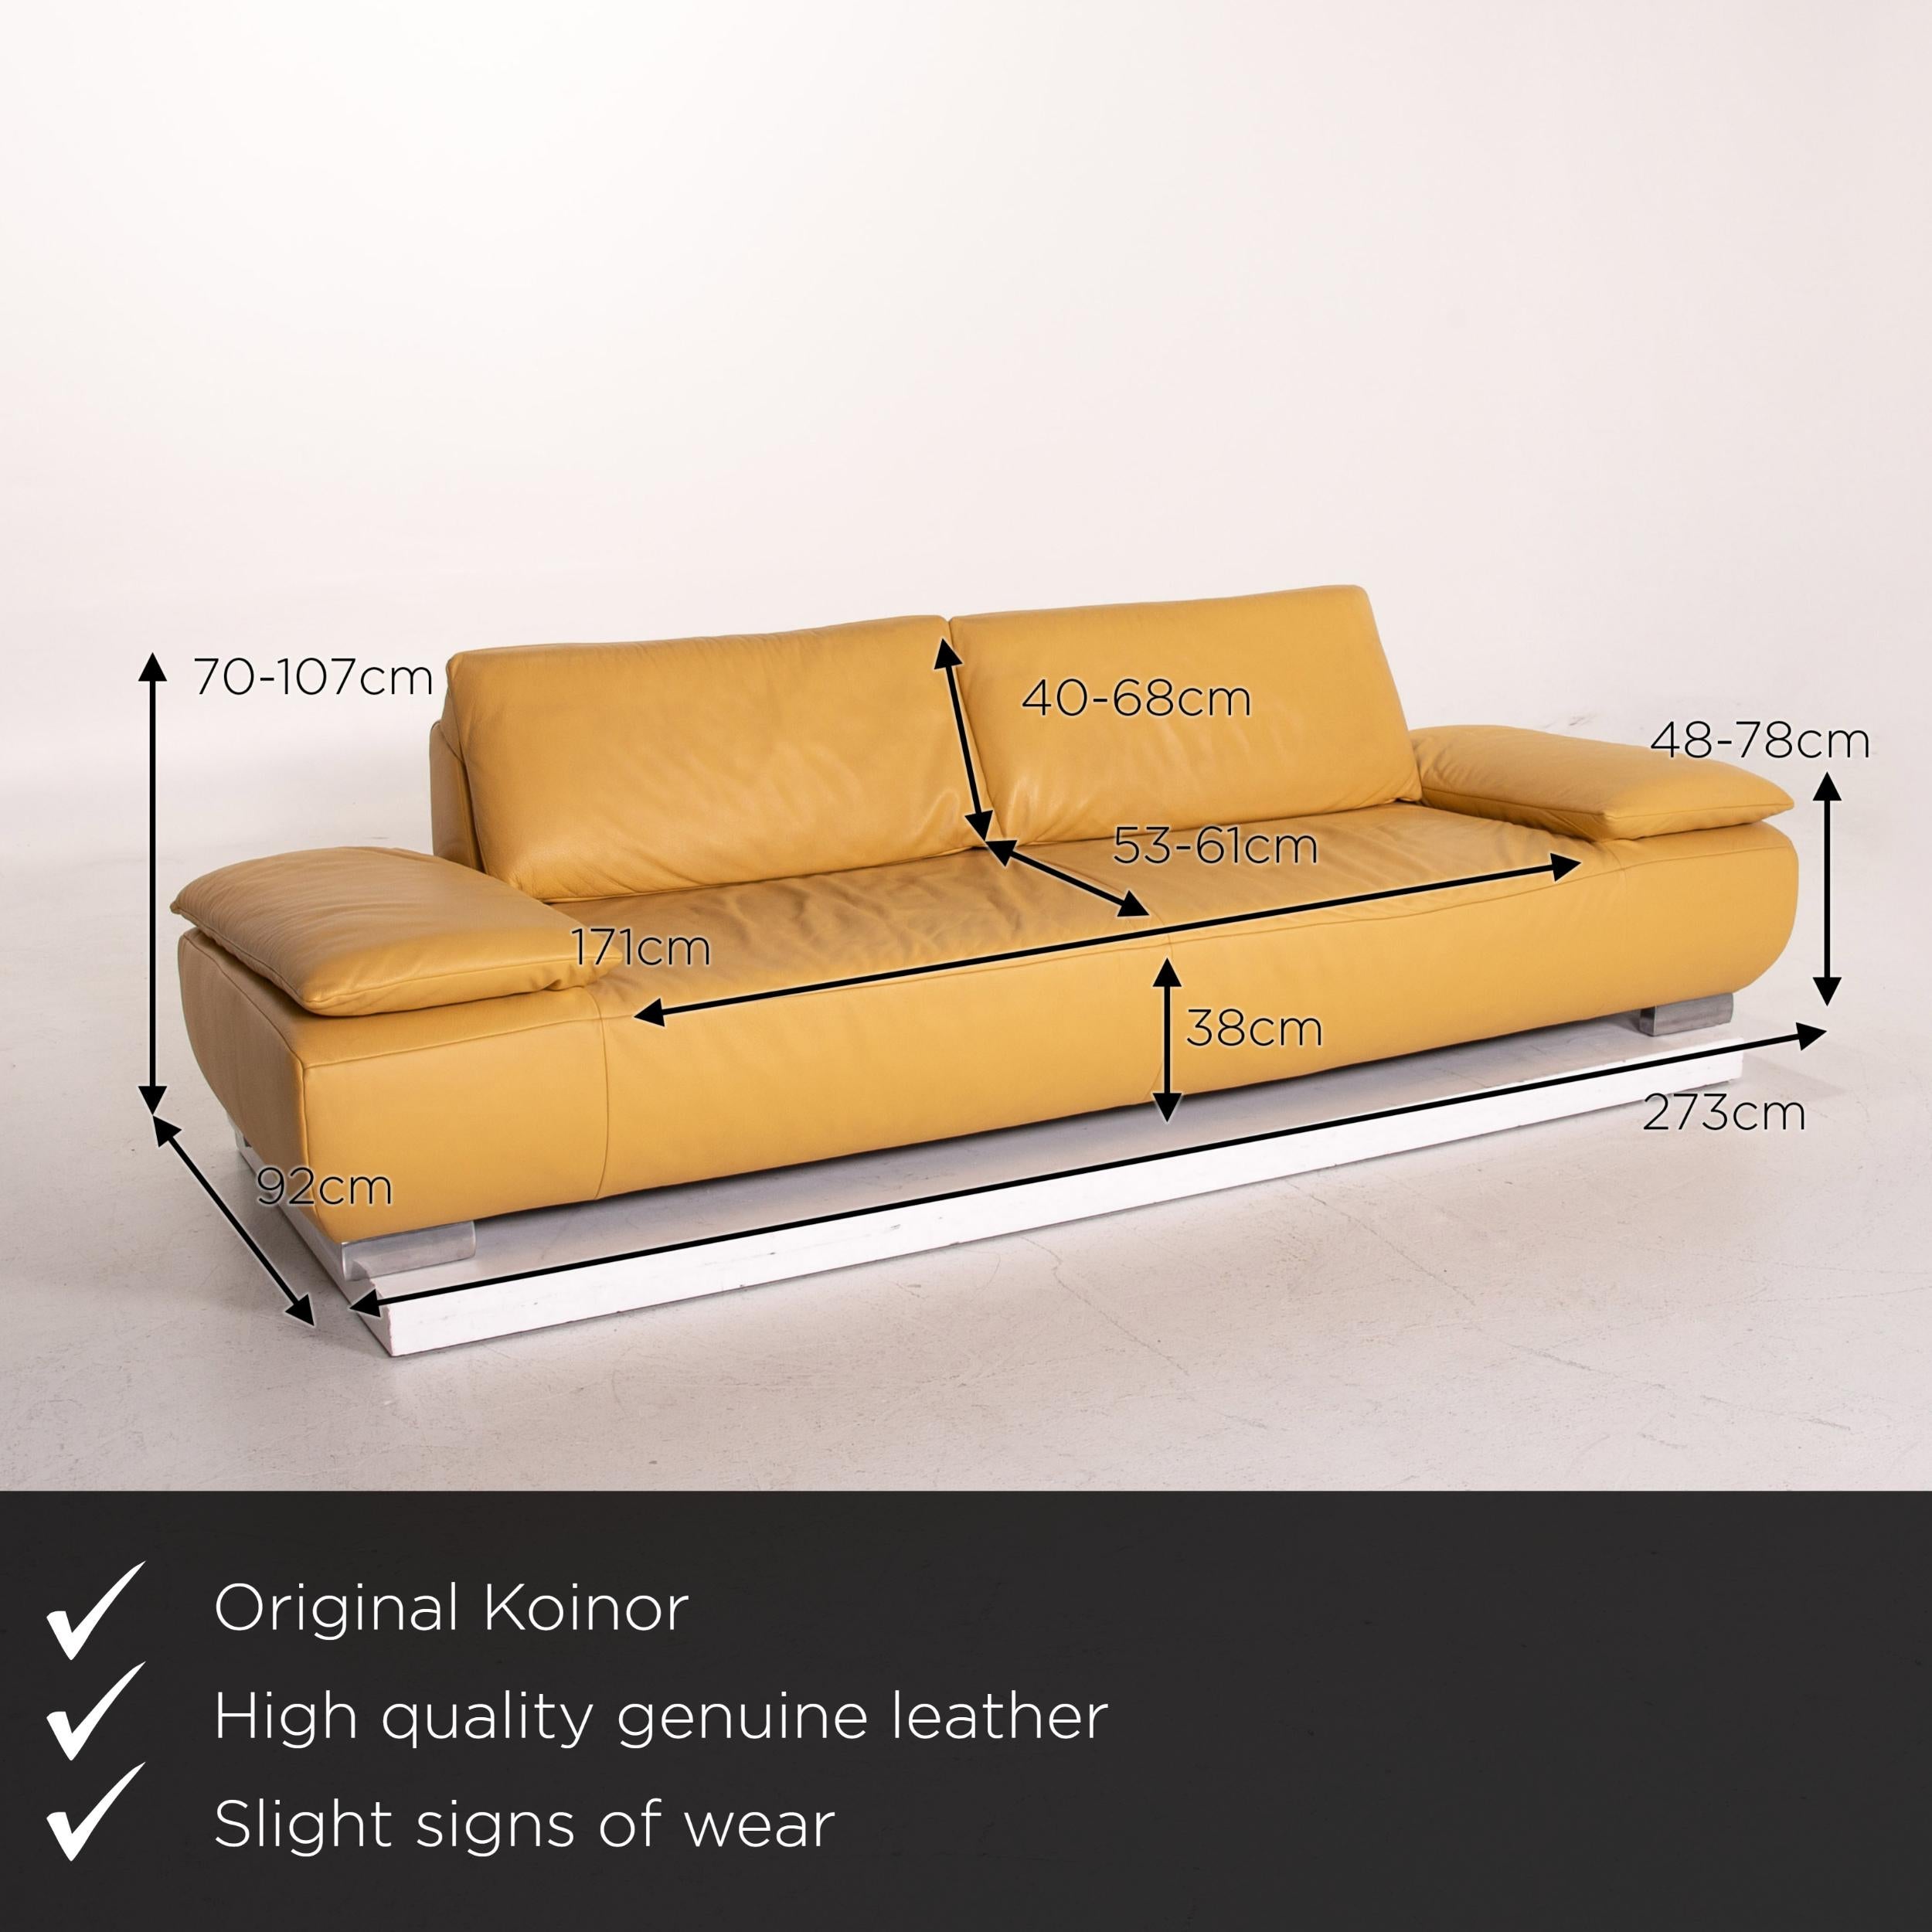 We present to you a Koinor Volare leather sofa yellow three-seat function couch.
  
 

 Product measurements in centimeters:
 

Depth 92
Width 273
Height 70
Seat height 38
Rest height 48
Seat depth 53
Seat width 171
Back height 40.